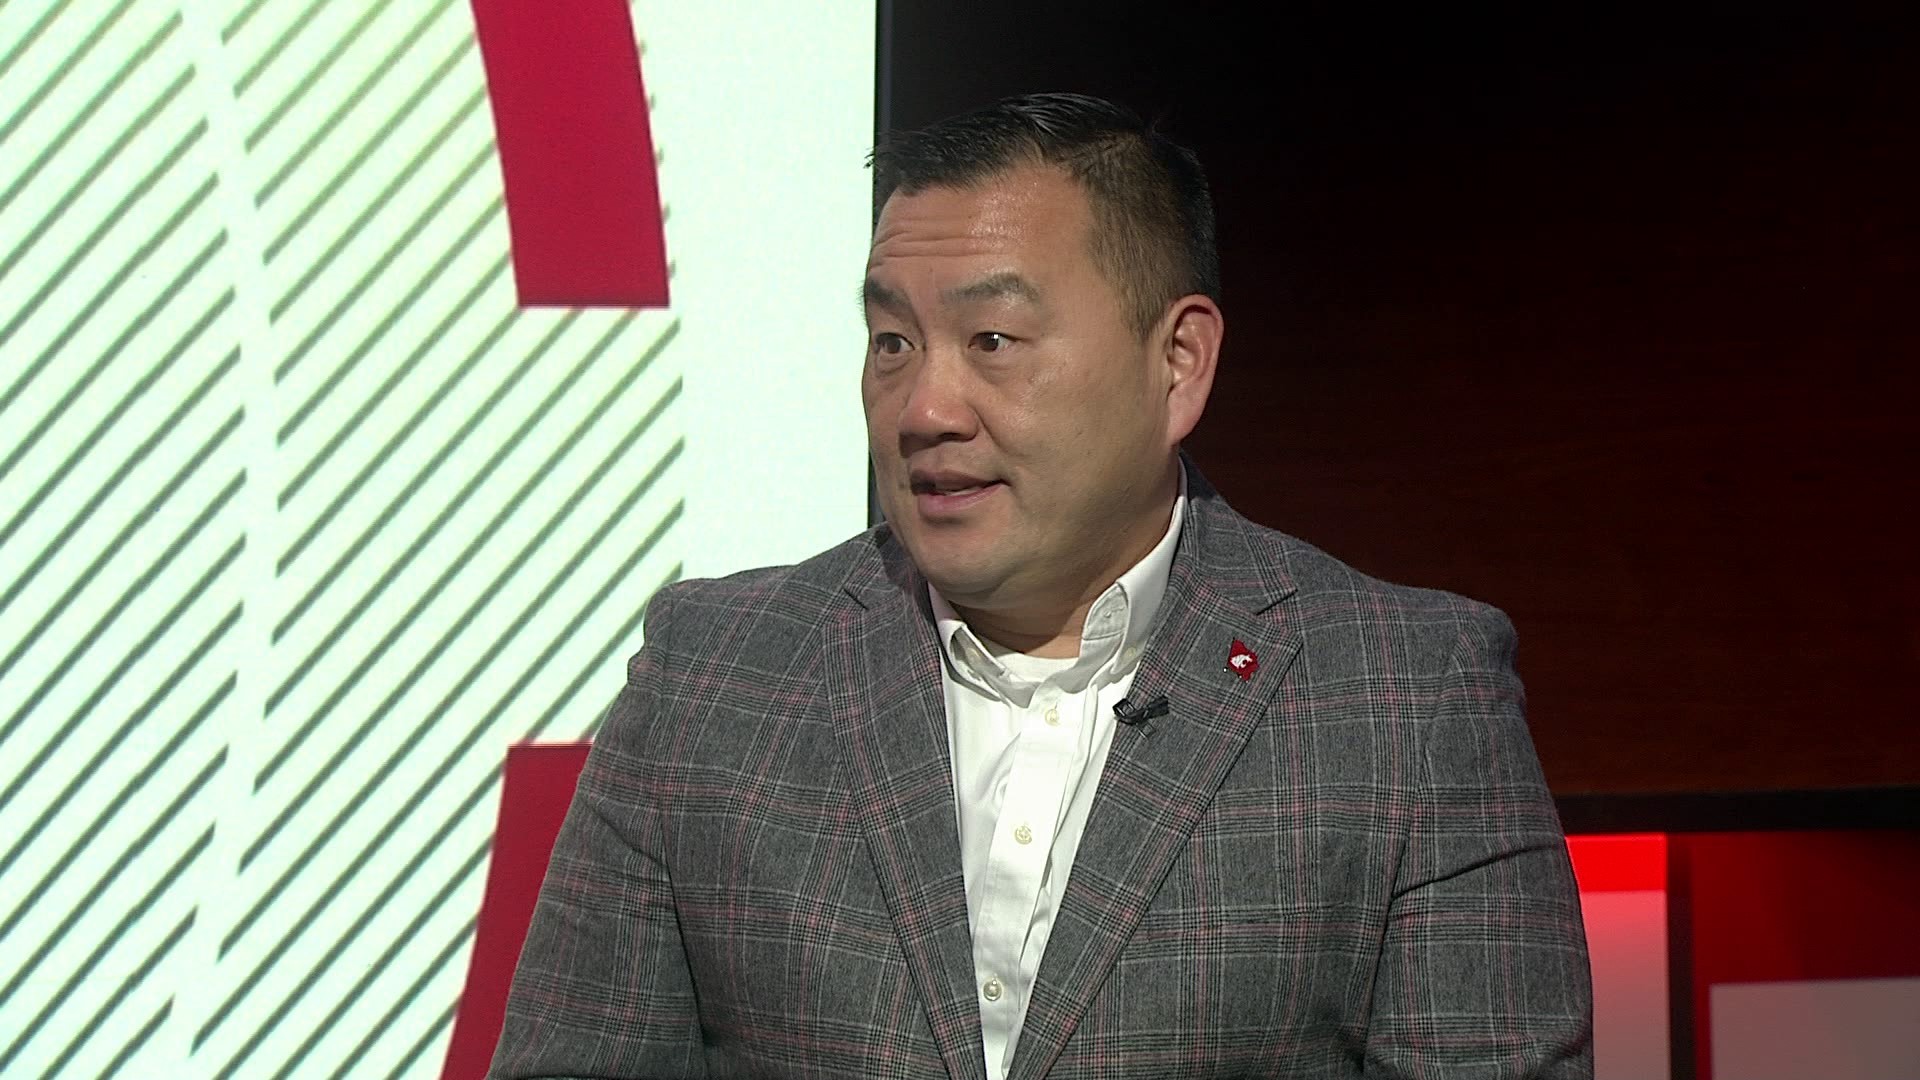 Washington State University's Pat Chun also discussed conference realignment, the transfer portal model in college athletics and Thanksgiving dinner must-haves.